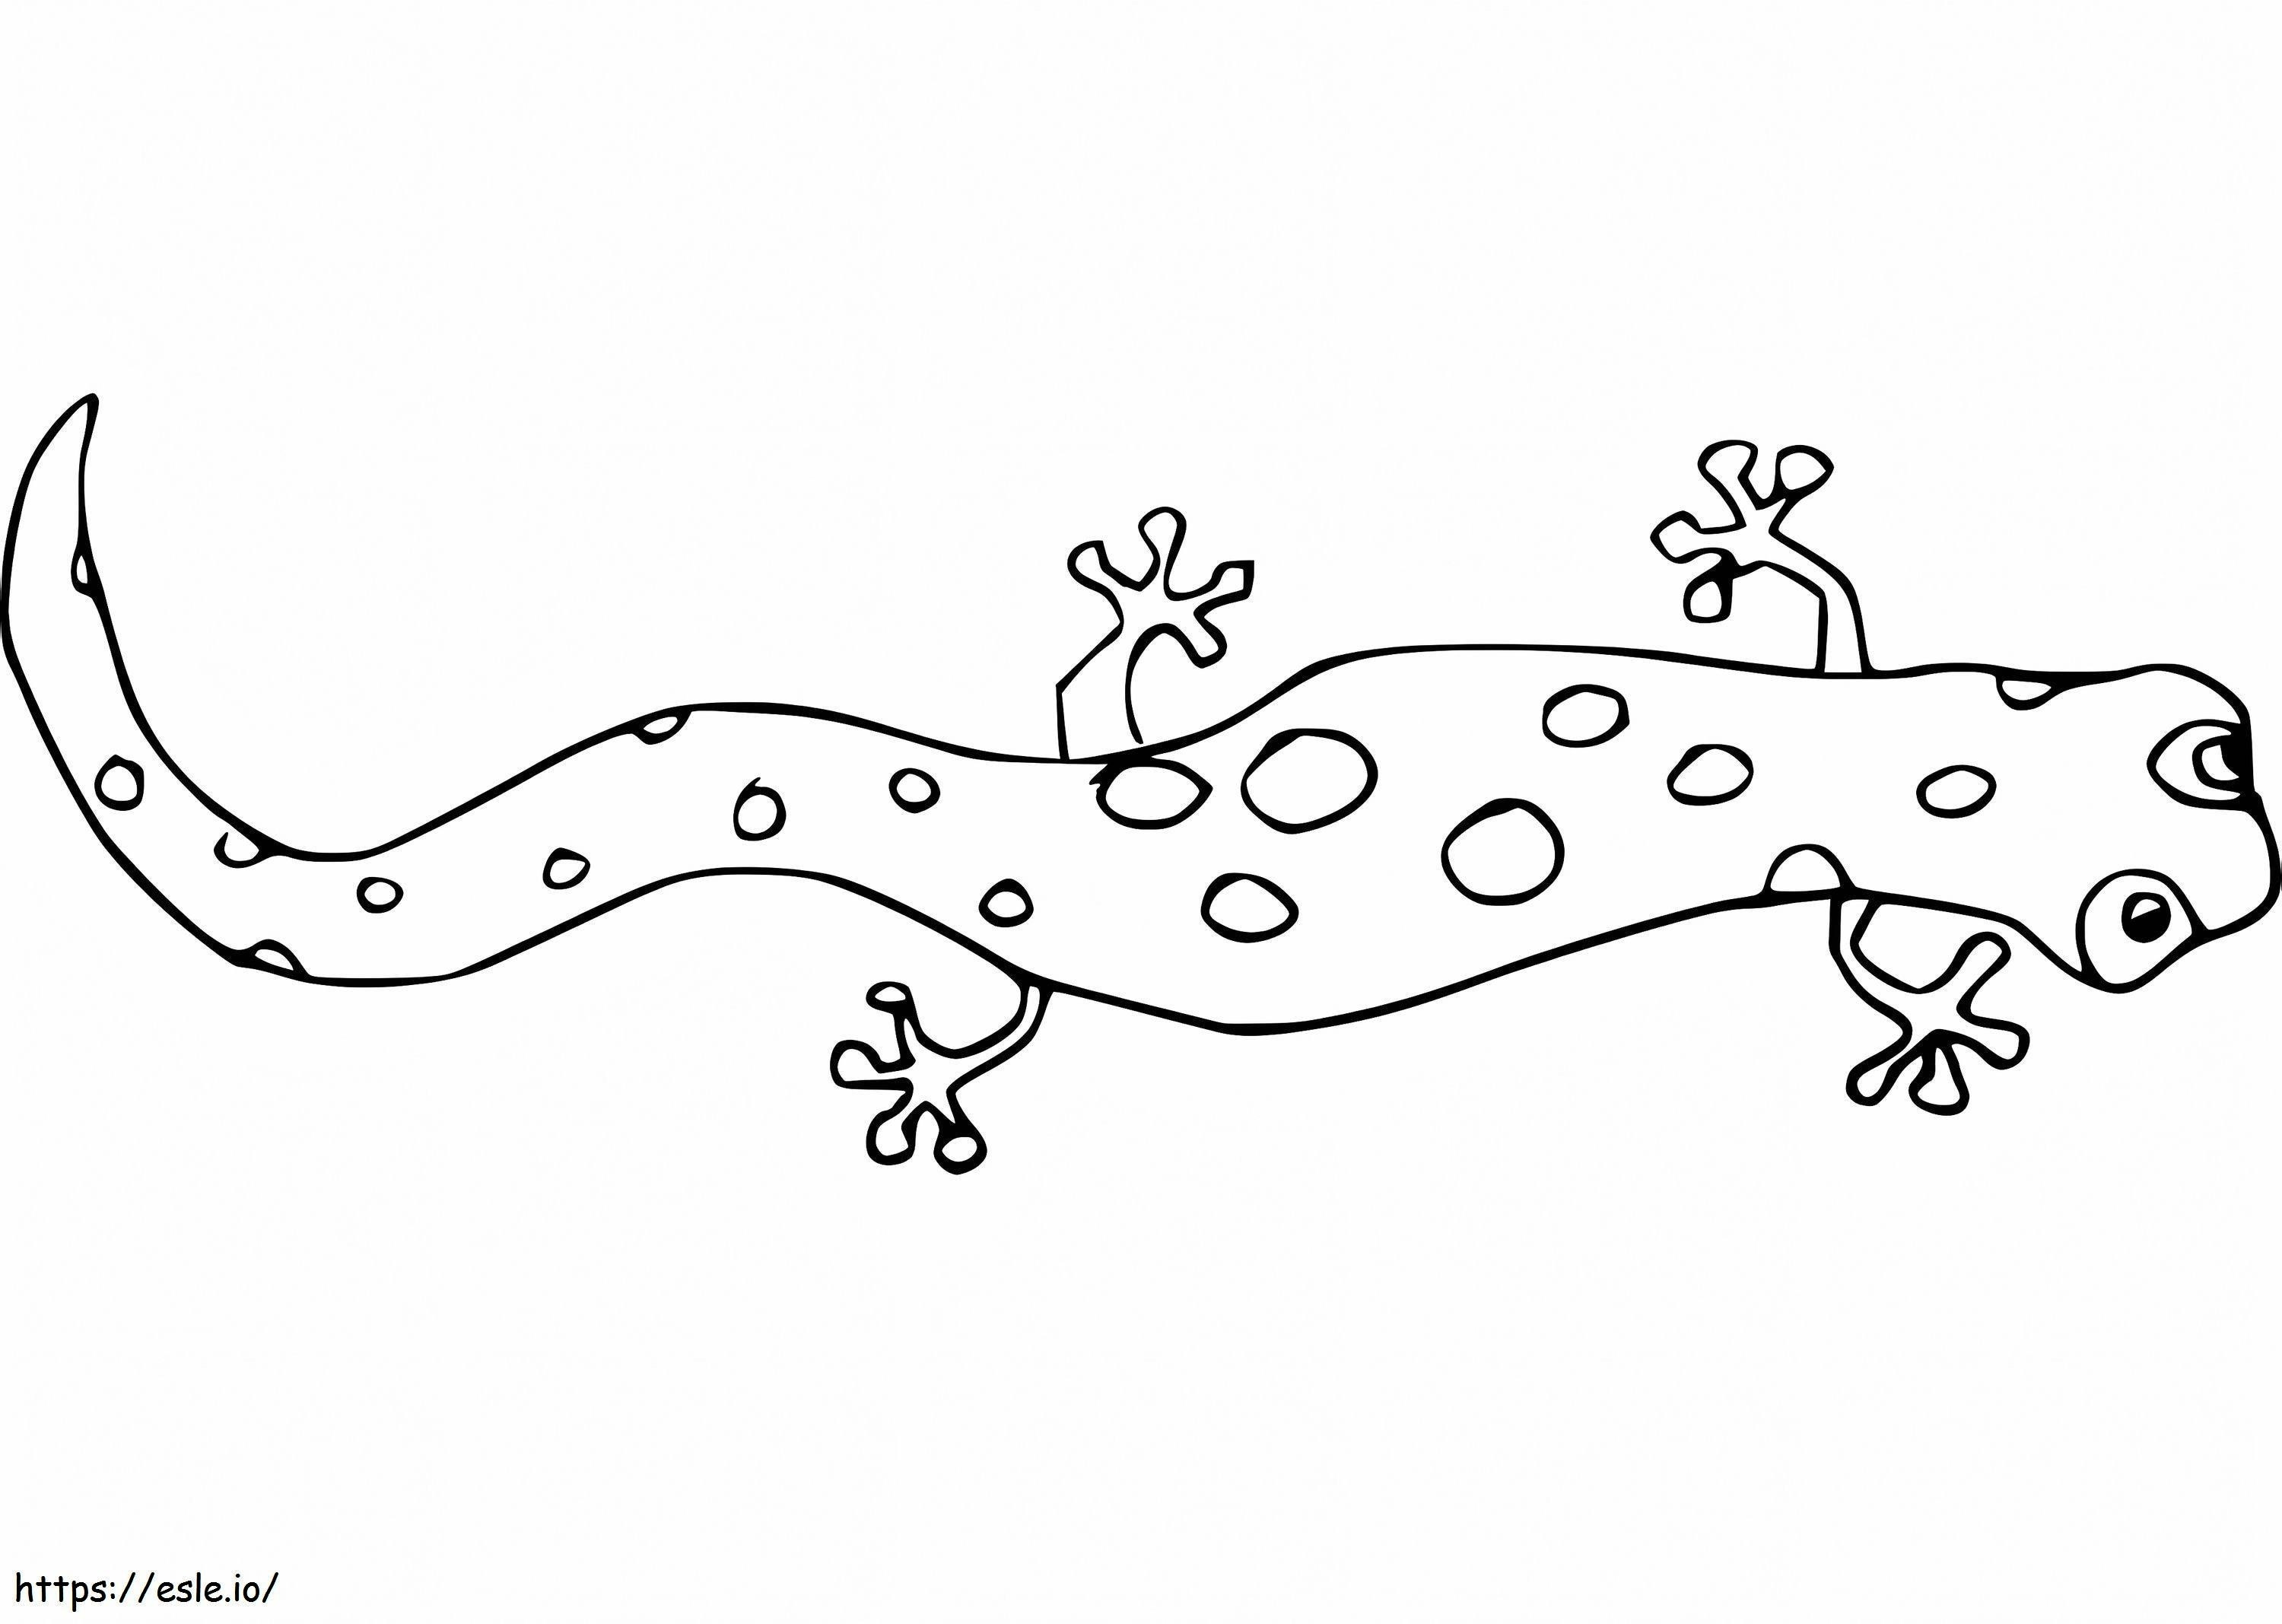 Ugly Spotted Newt coloring page